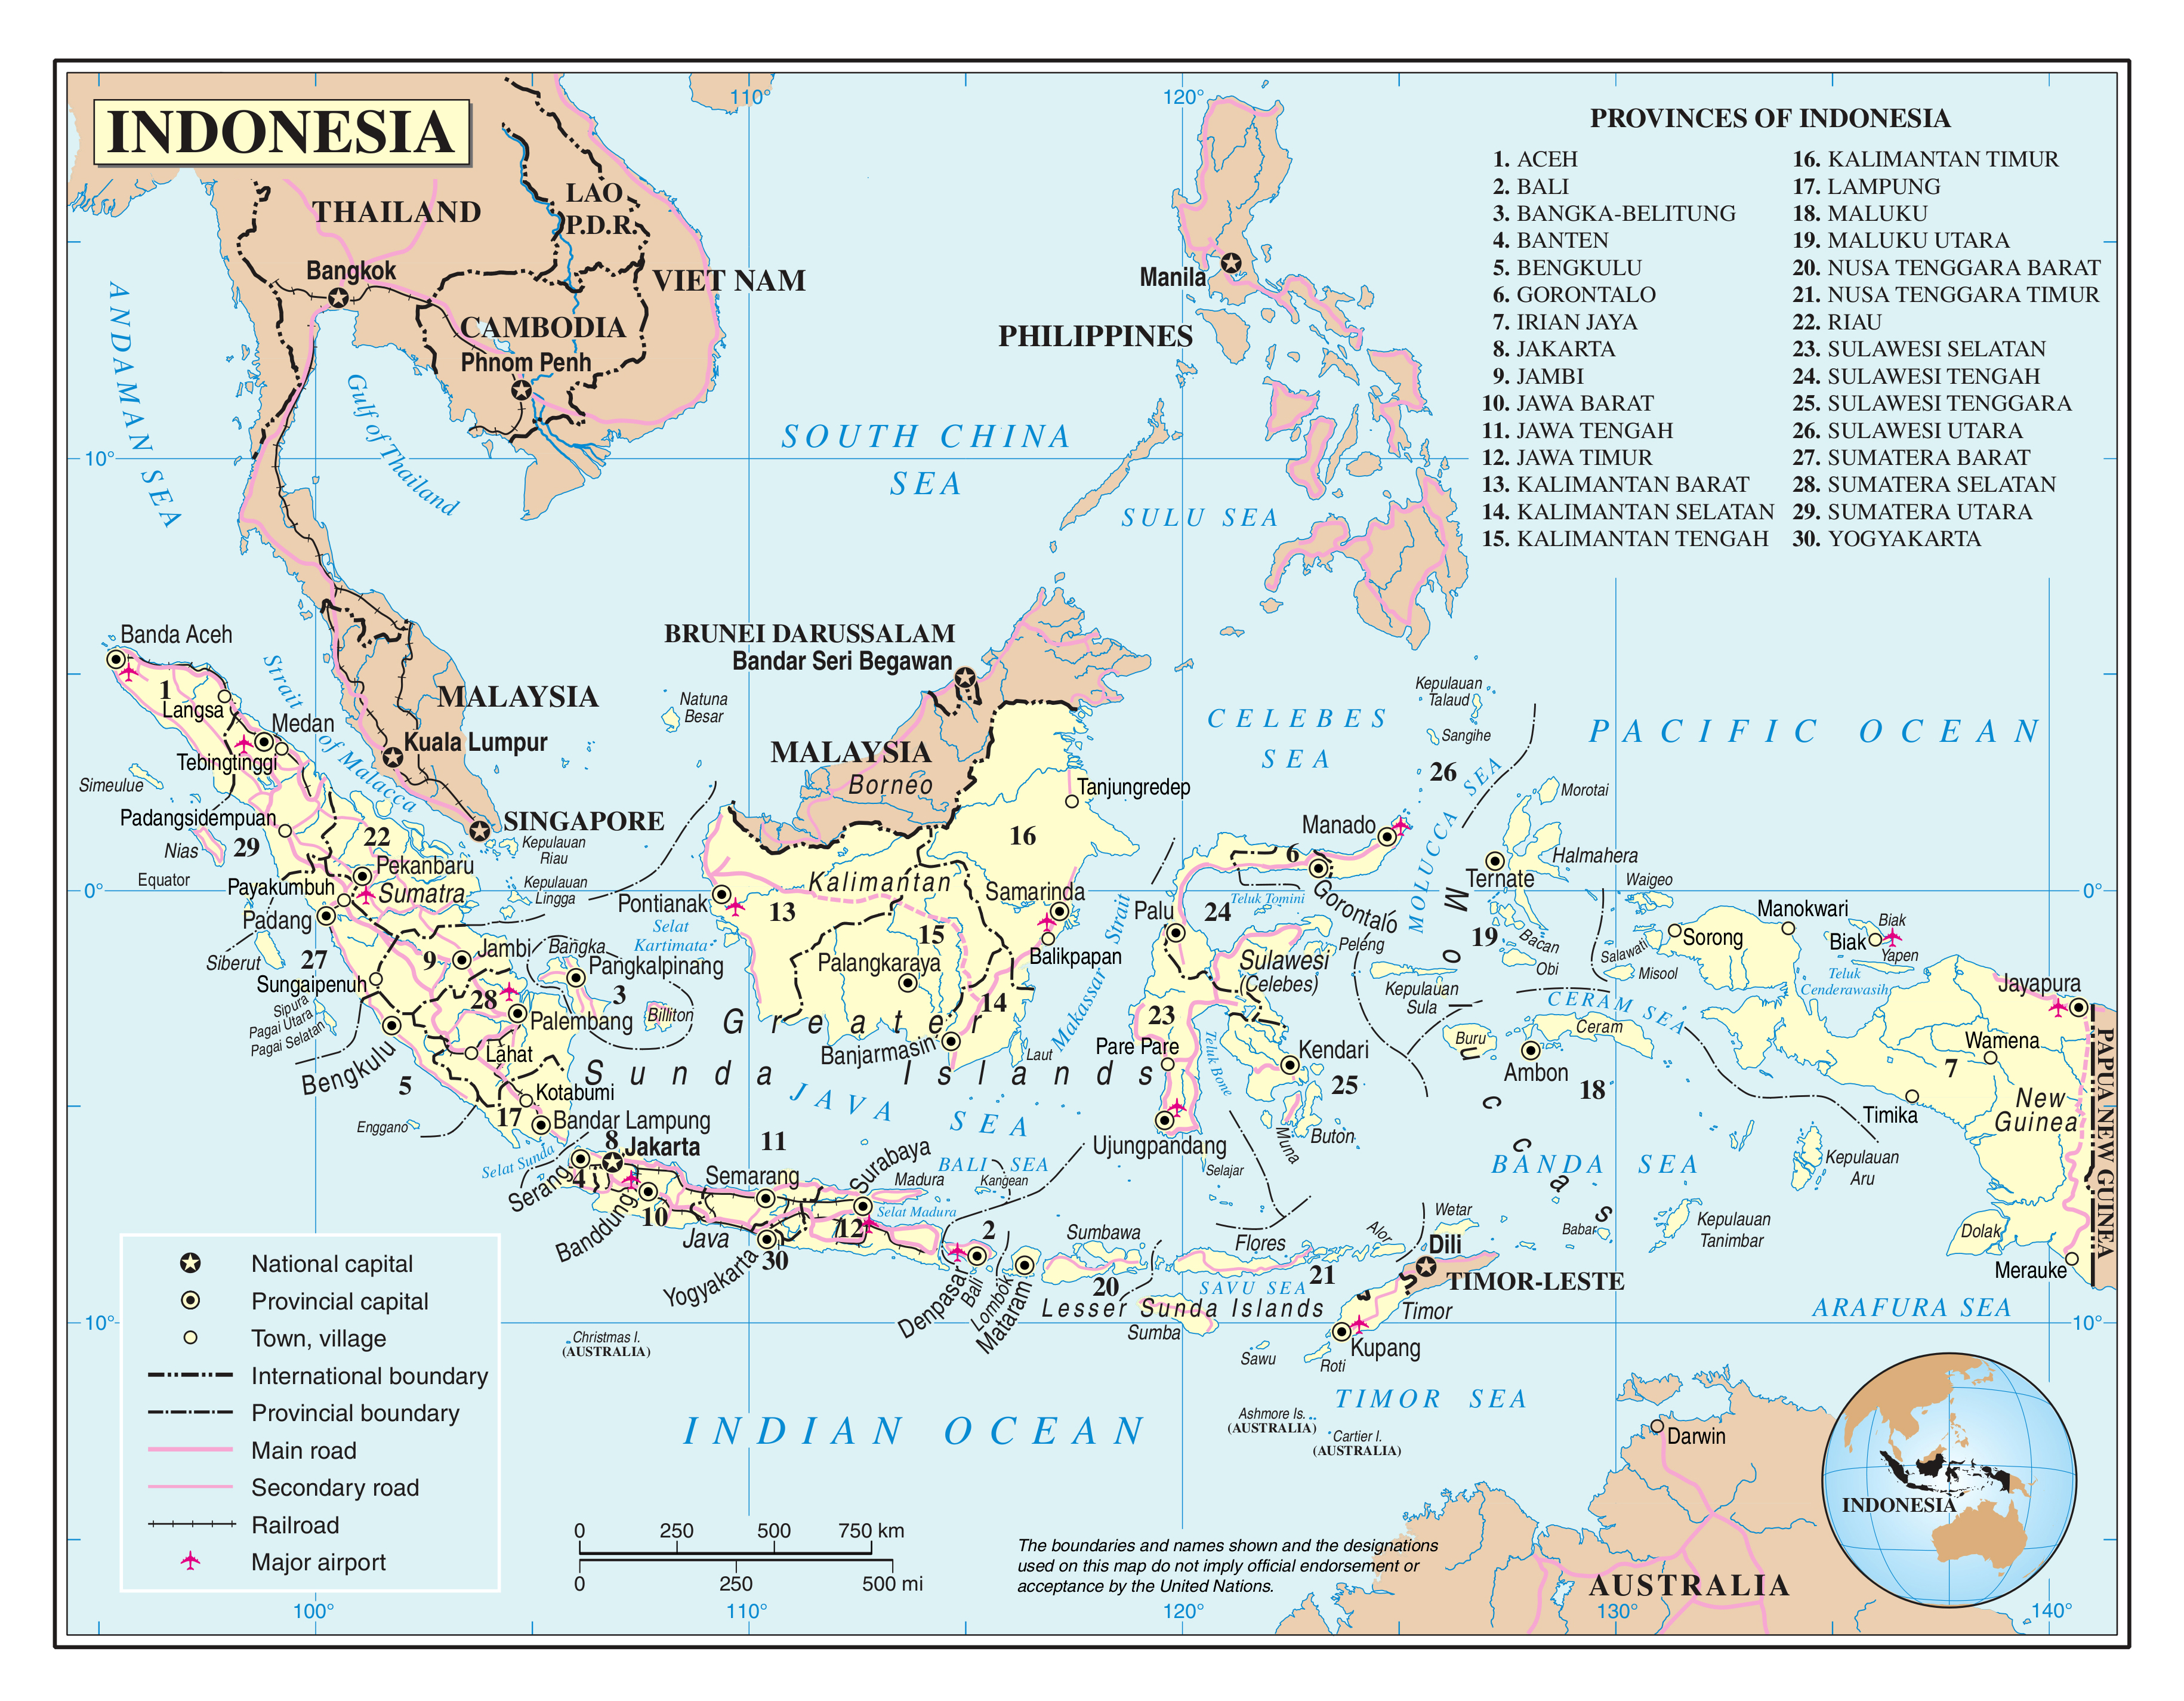 Indonesia Map Images